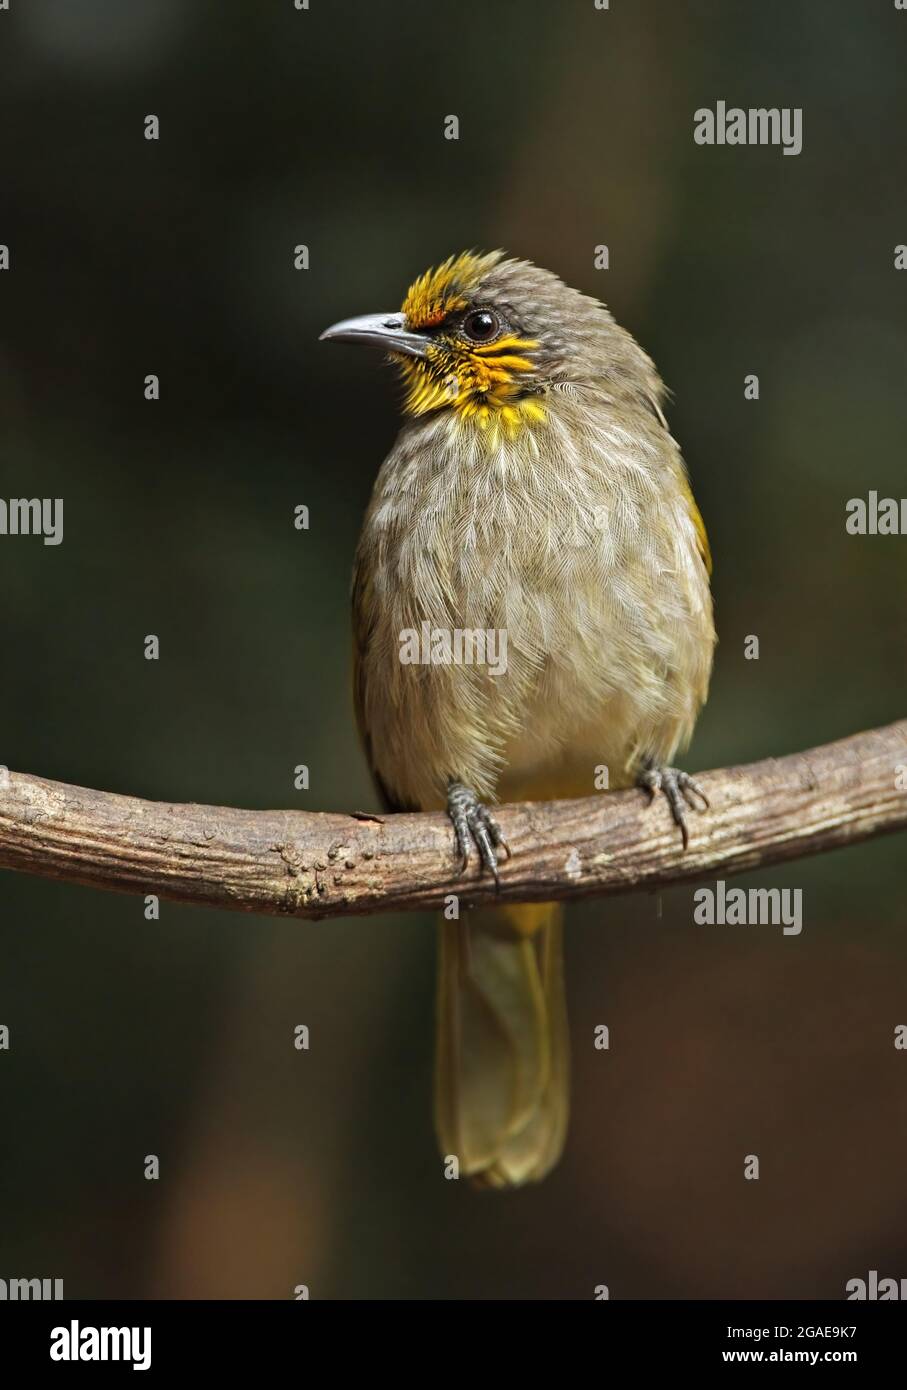 Stripe-throated Bulbul (Pycnonotos finlaysoni eous) adult perched on branch Kaeng Krachan, Thailand            February Stock Photo